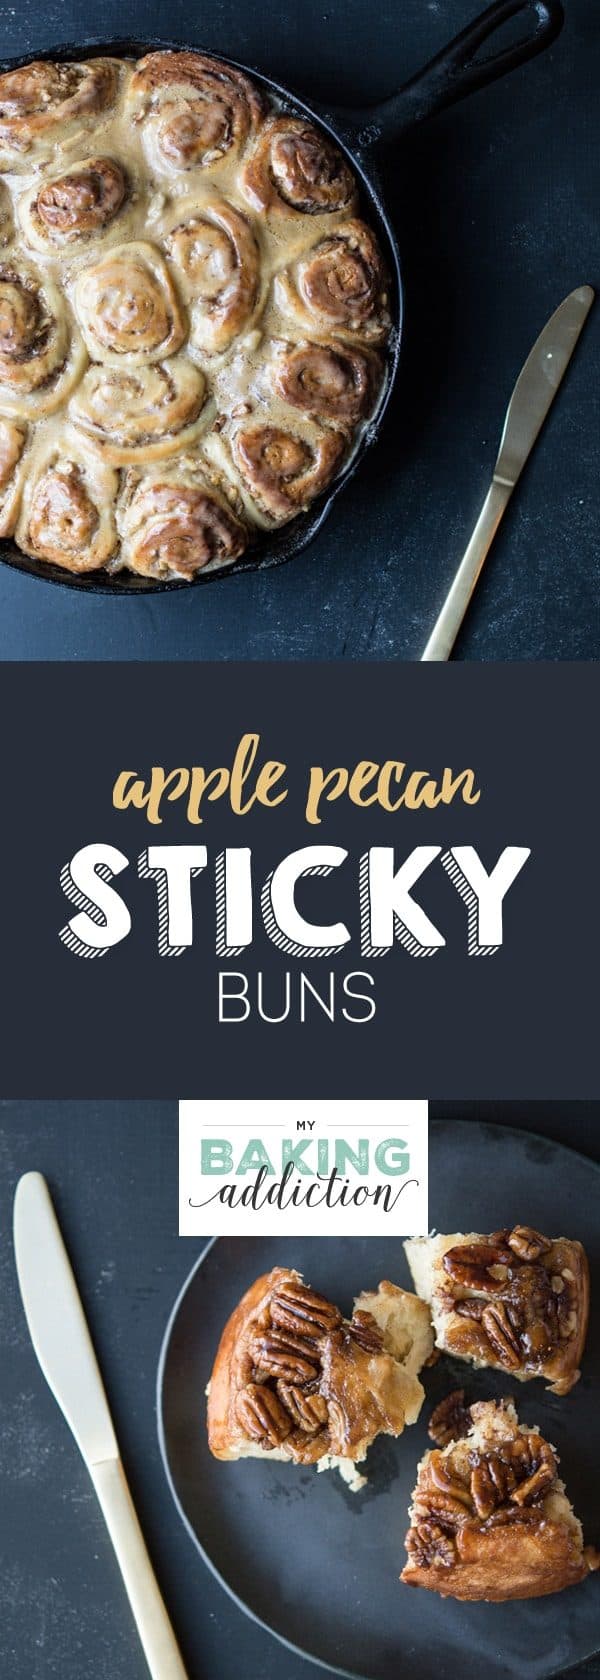 Apple Pecan Sticky Buns are perfect for fall weekends, best served piping hot and just out of the oven. So good!